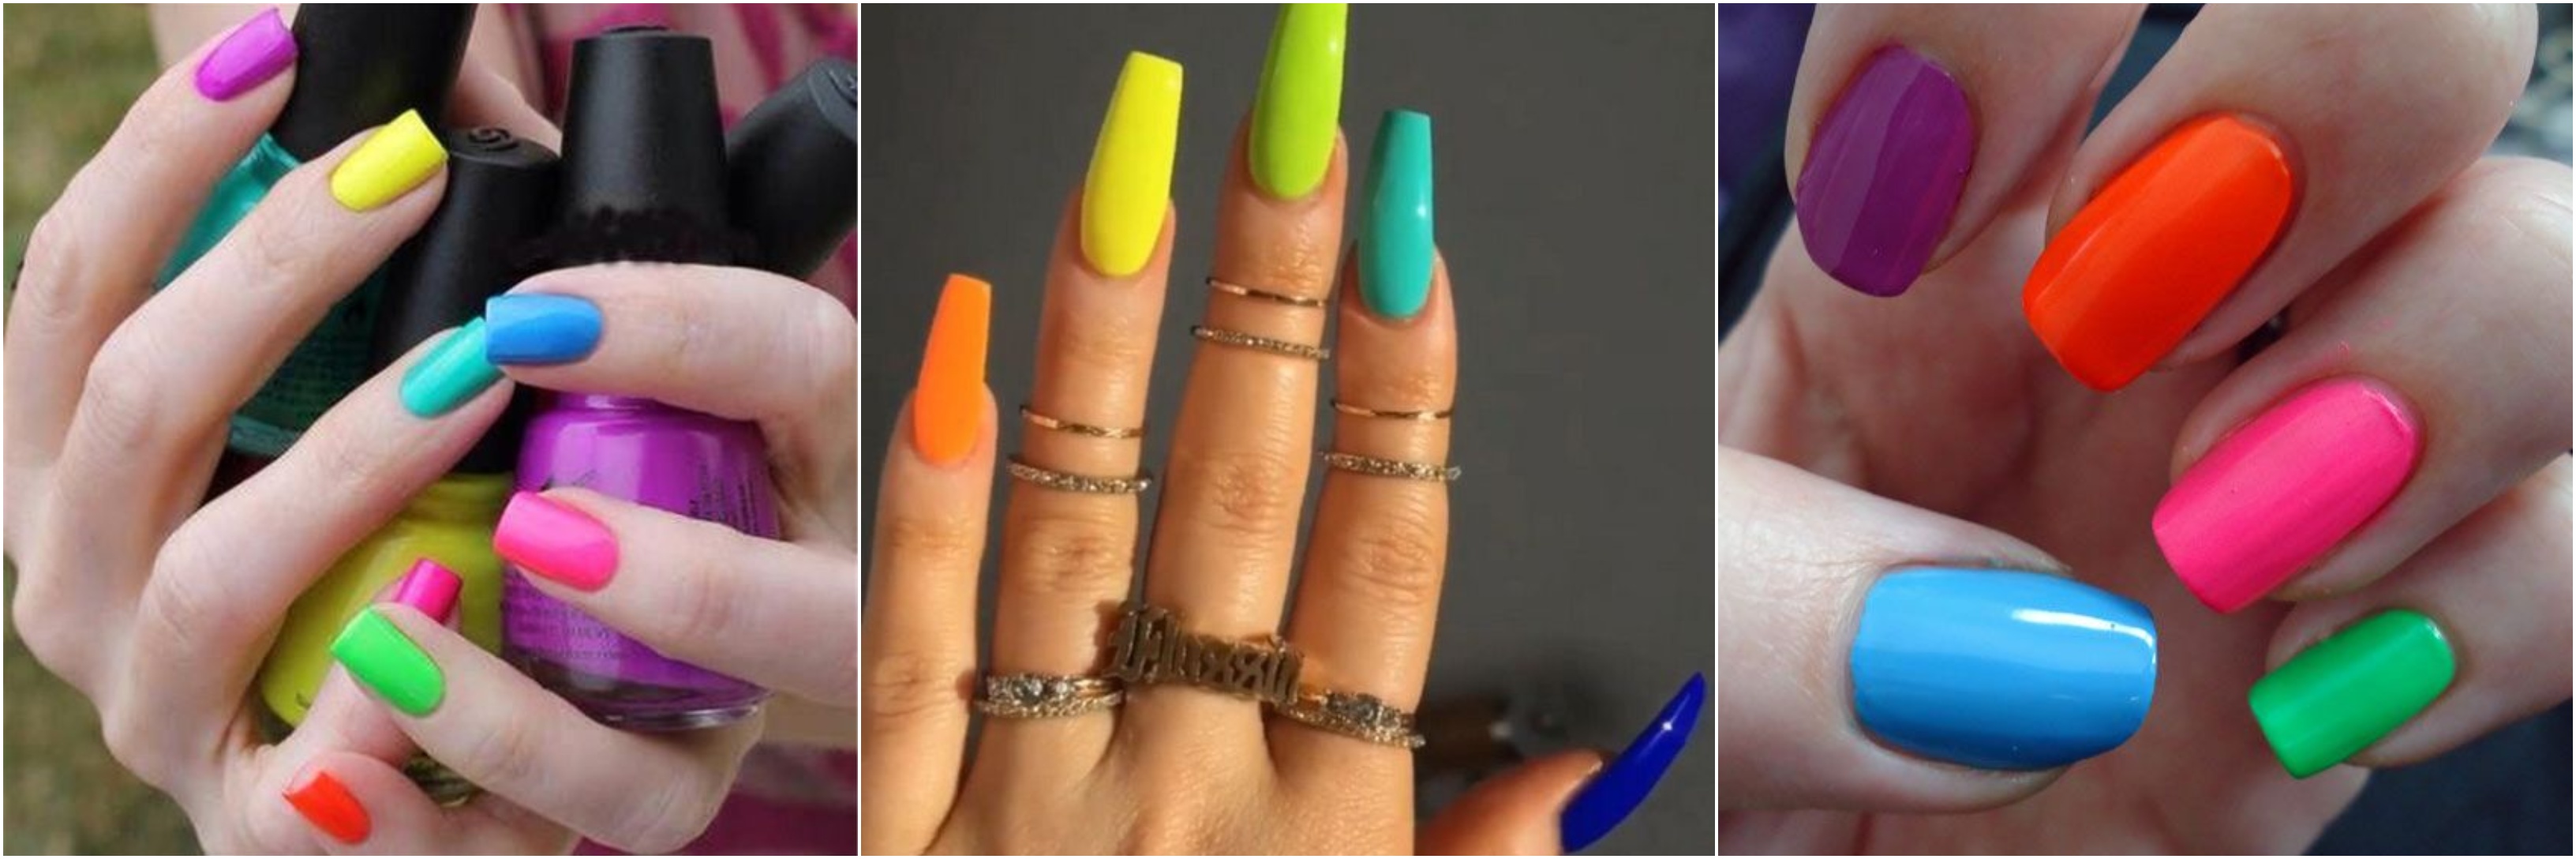 Neon Nails 8 Ways To Embrace The Trend While Keeping It Simple